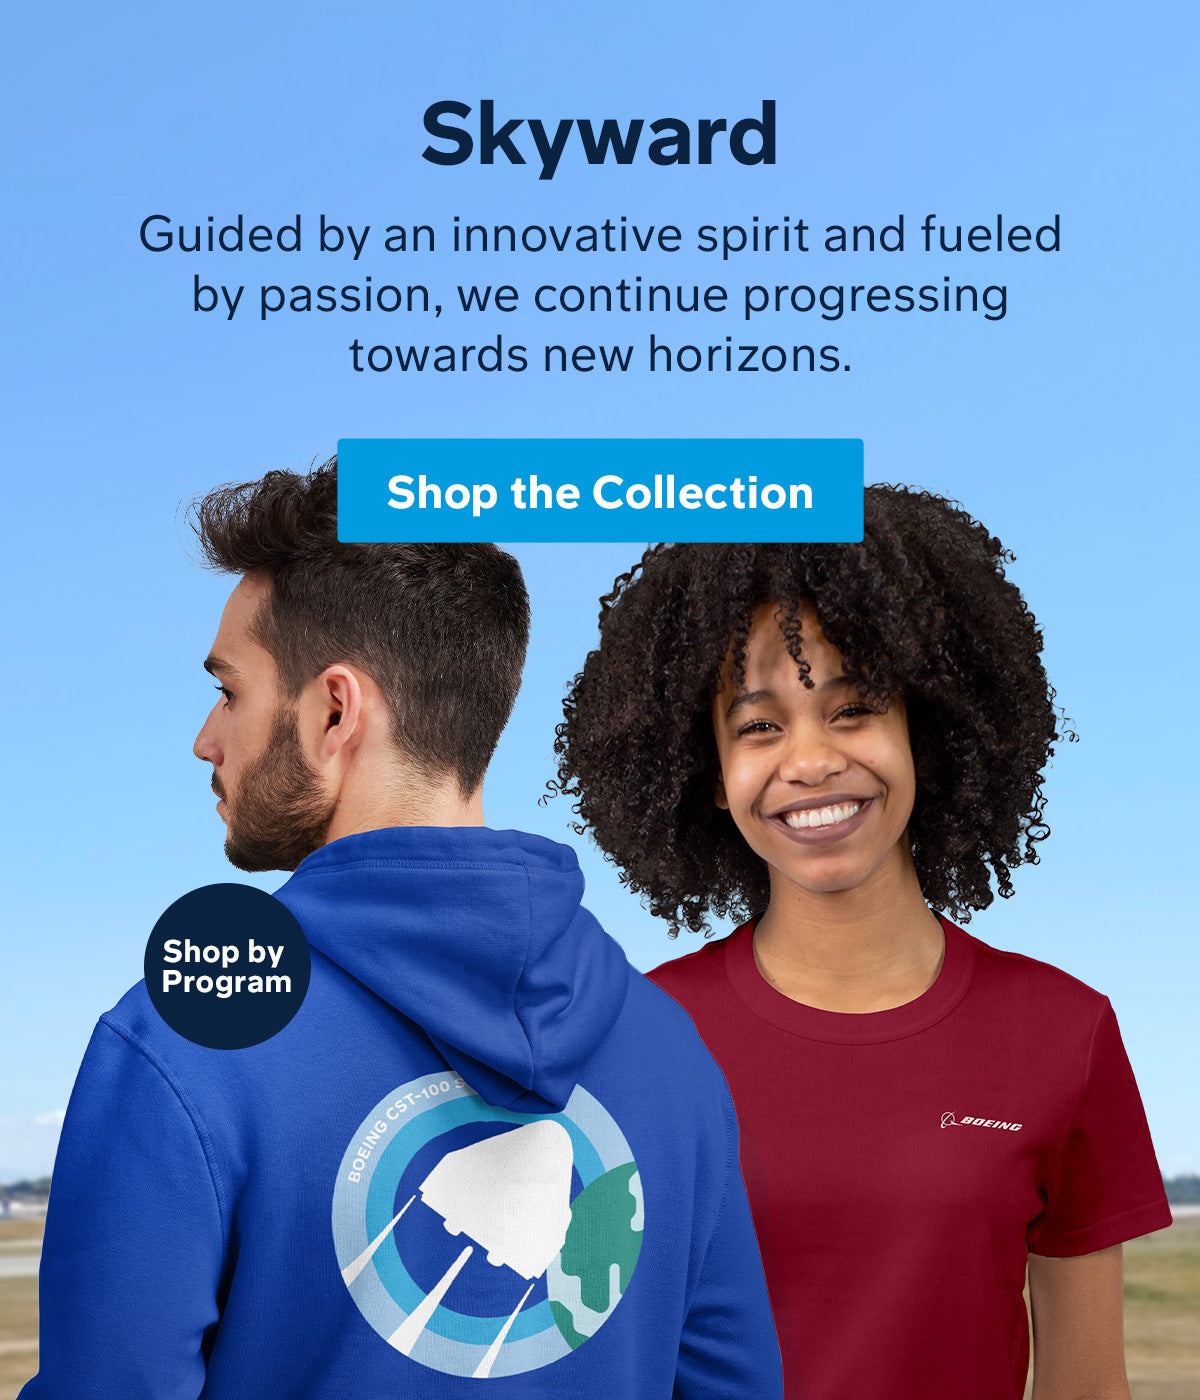 Skyward mobile HP banner featuring man and woman wearing apparel with a blue sky background.